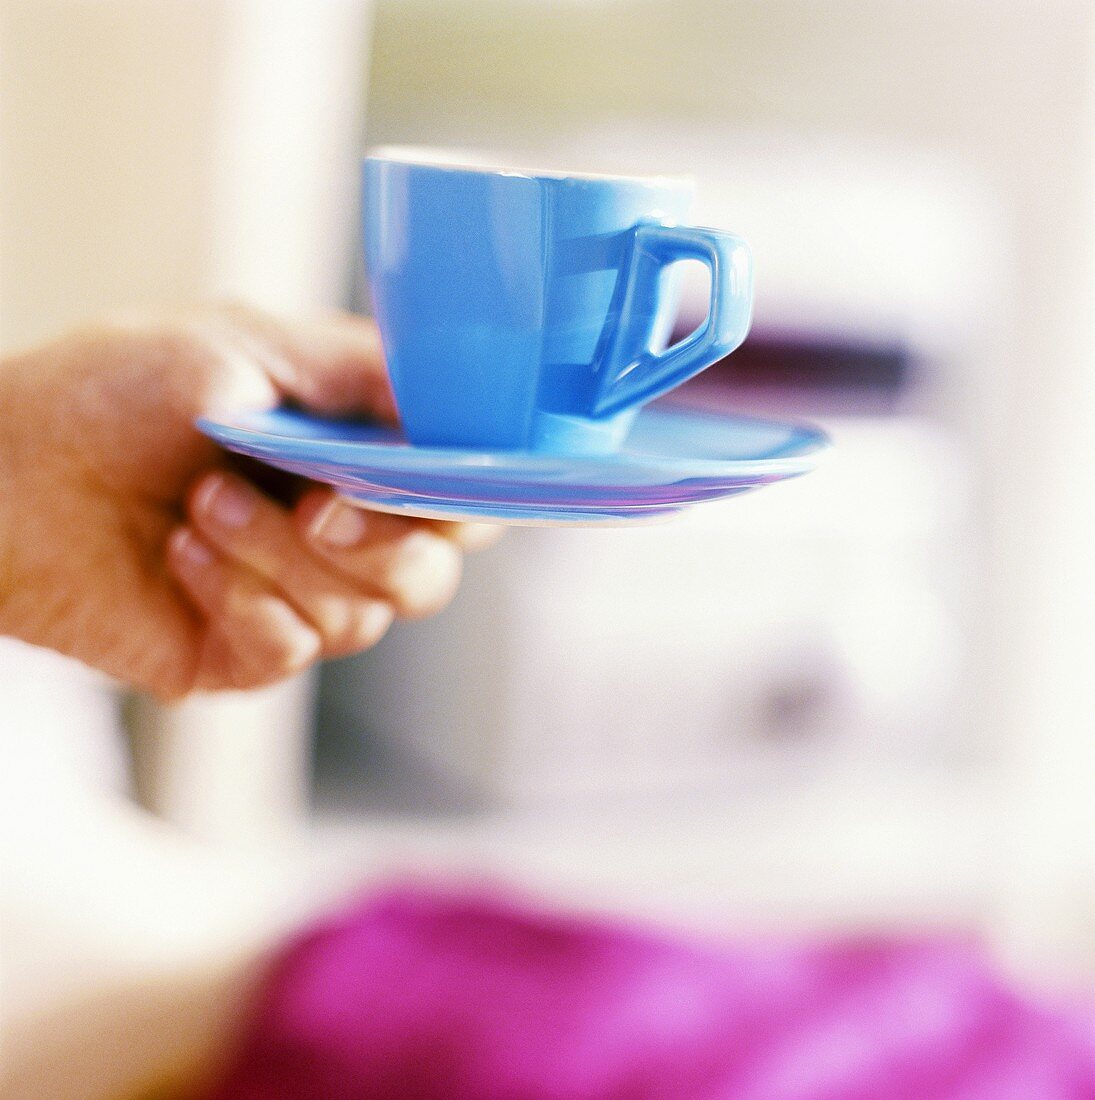 Hand holding a blue coffee cup and saucer